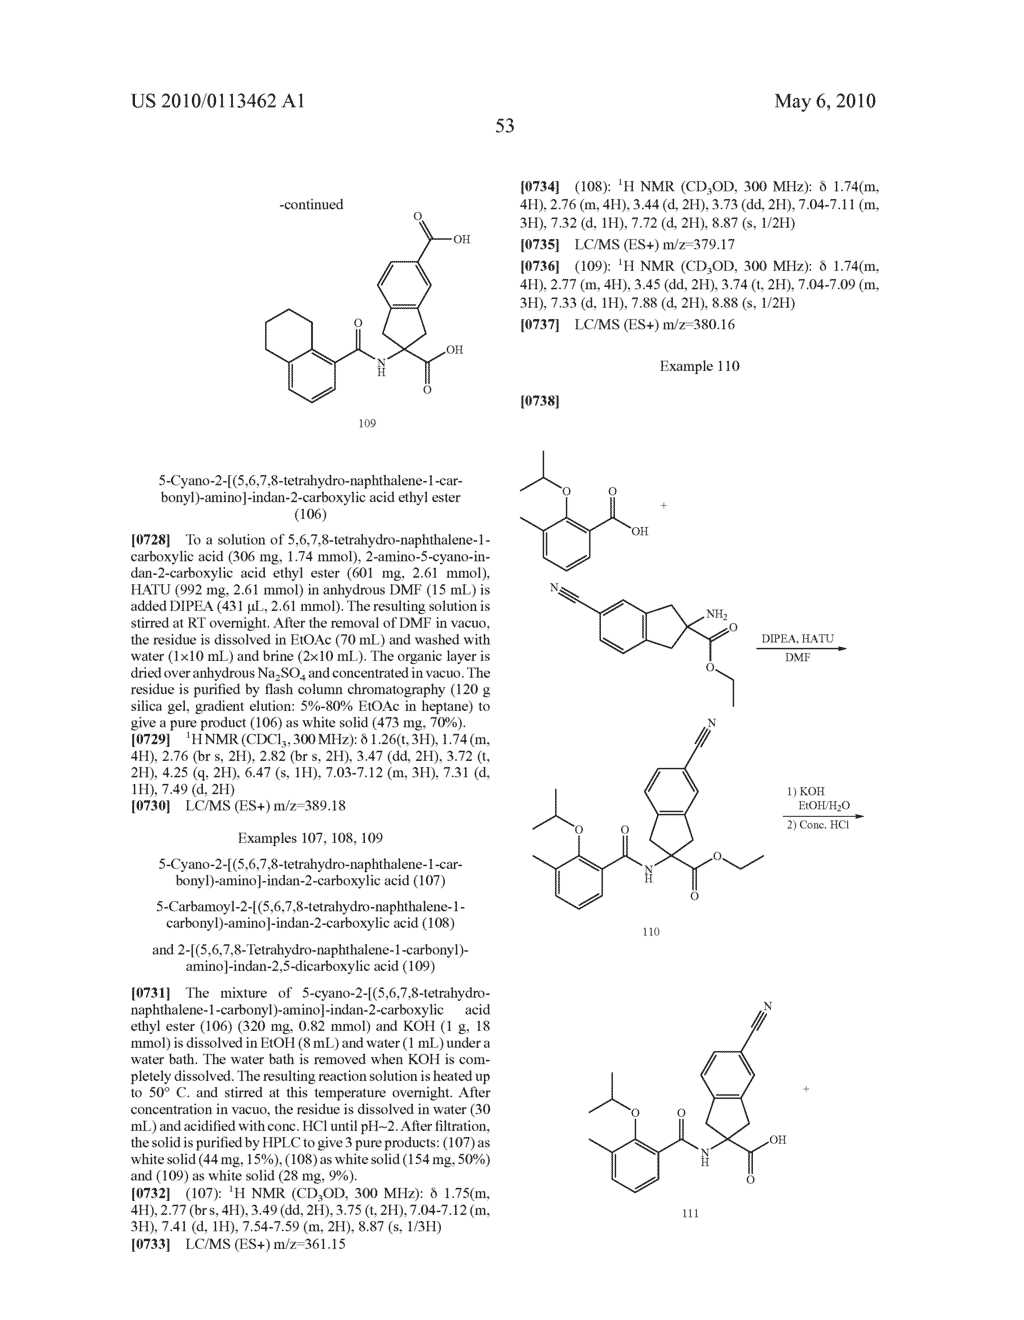 SUBSTITUTED BENZOYLAMINO-INDAN-2-CARBOXYLIC ACIDS AND RELATED COMPOUNDS - diagram, schematic, and image 54